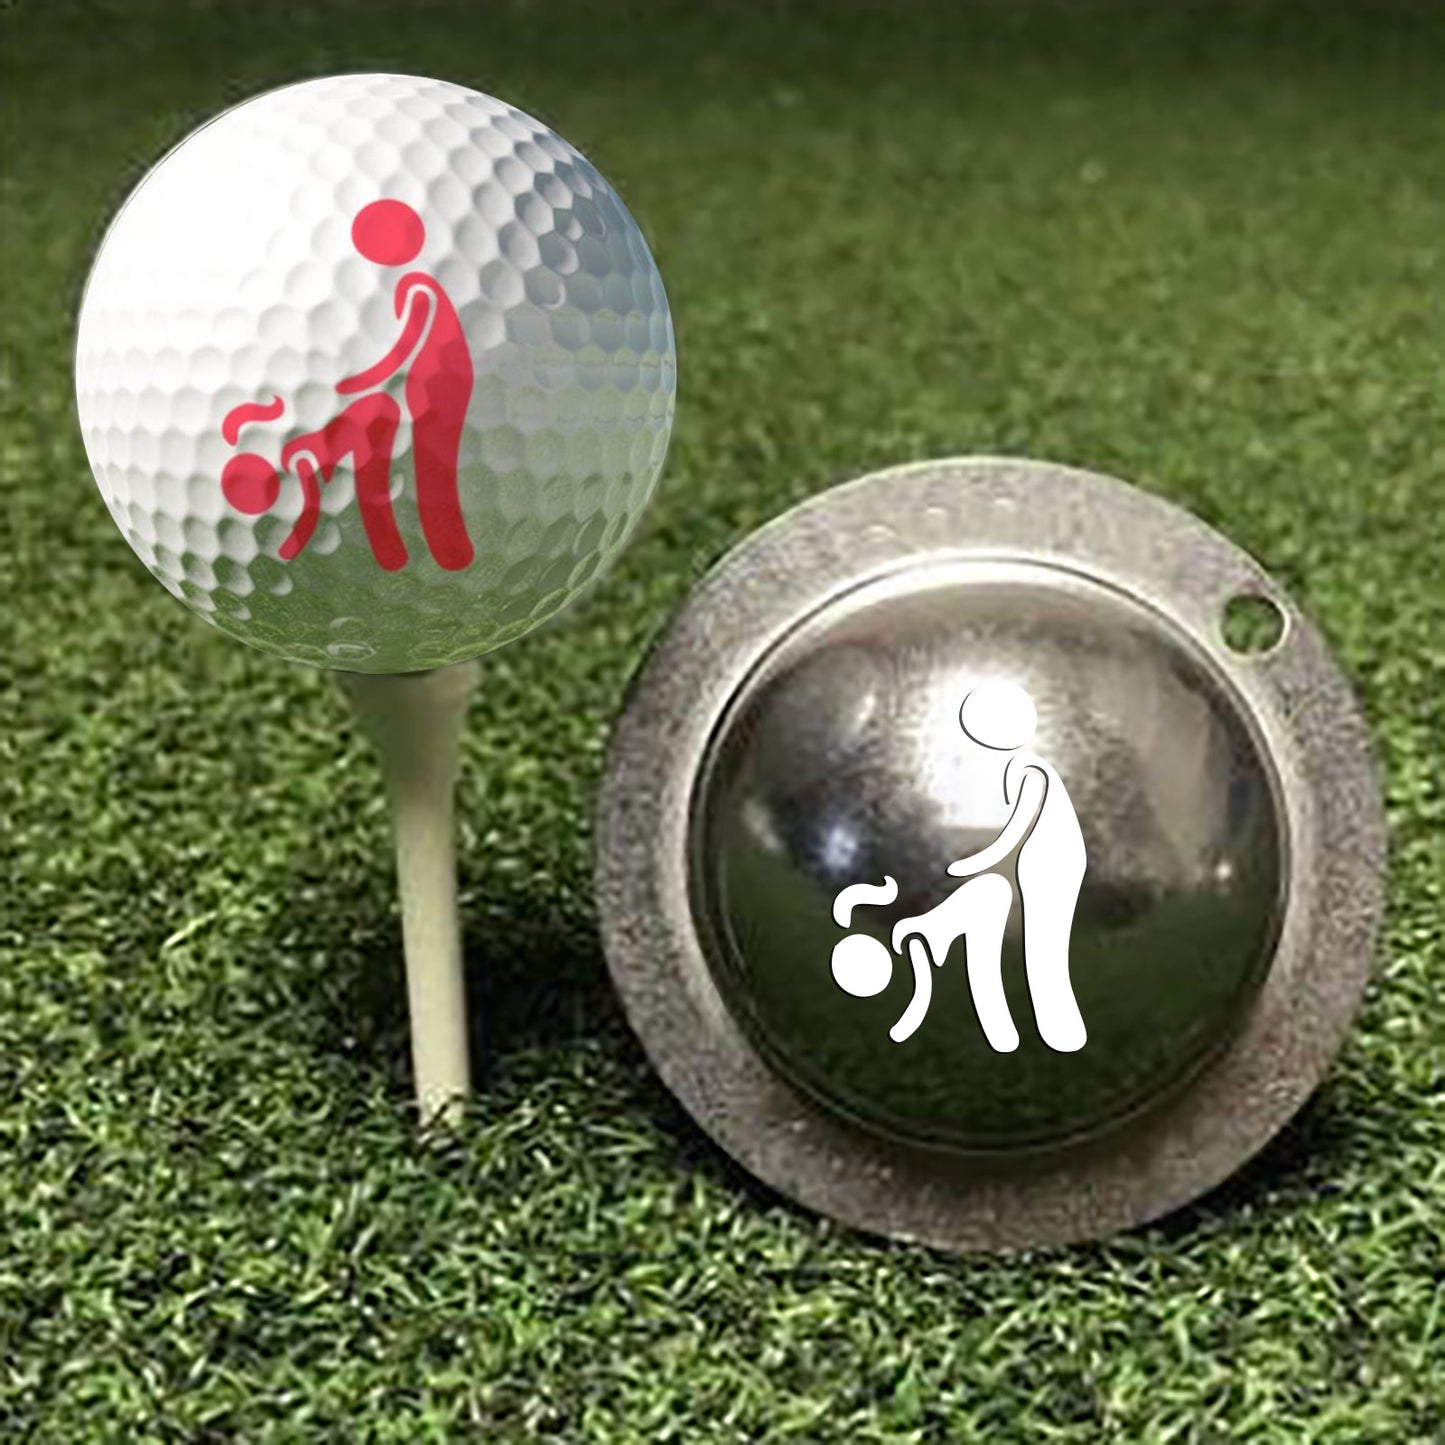 (⛳Buy 2 Get 10% OFF) Stainless Steel Golf Ball Marker